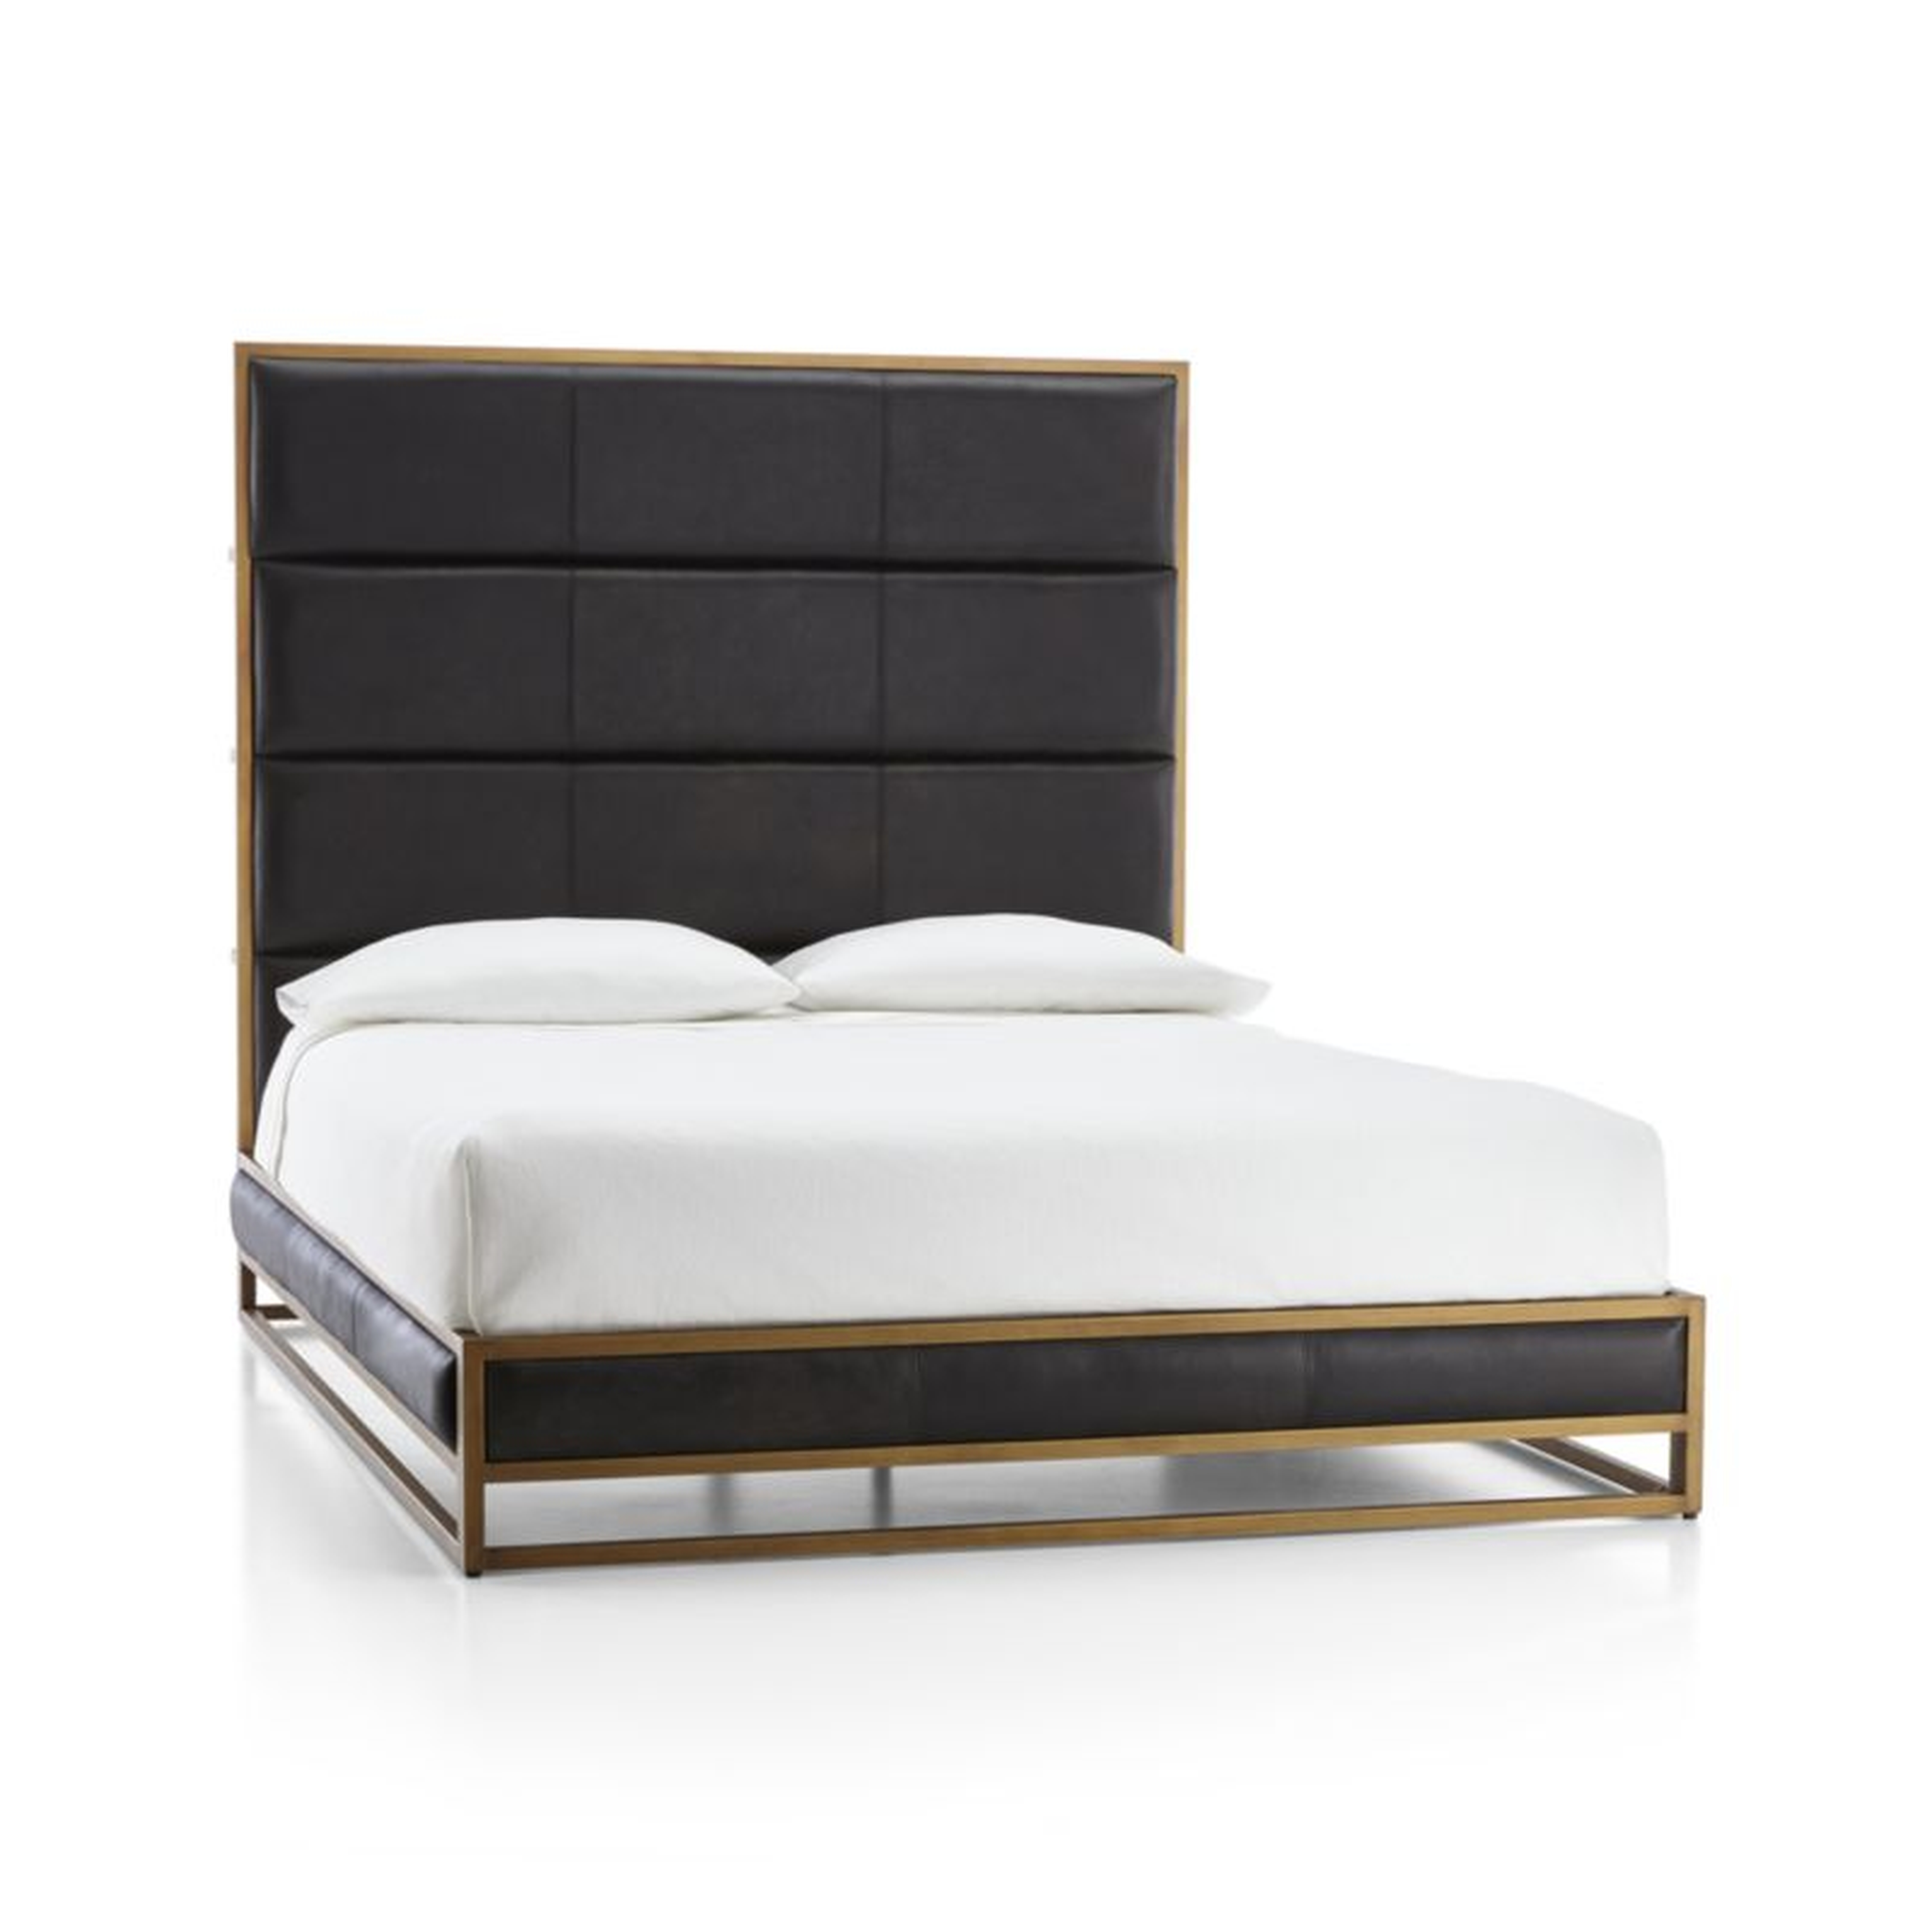 Oxford Leather Queen Bed - Crate and Barrel